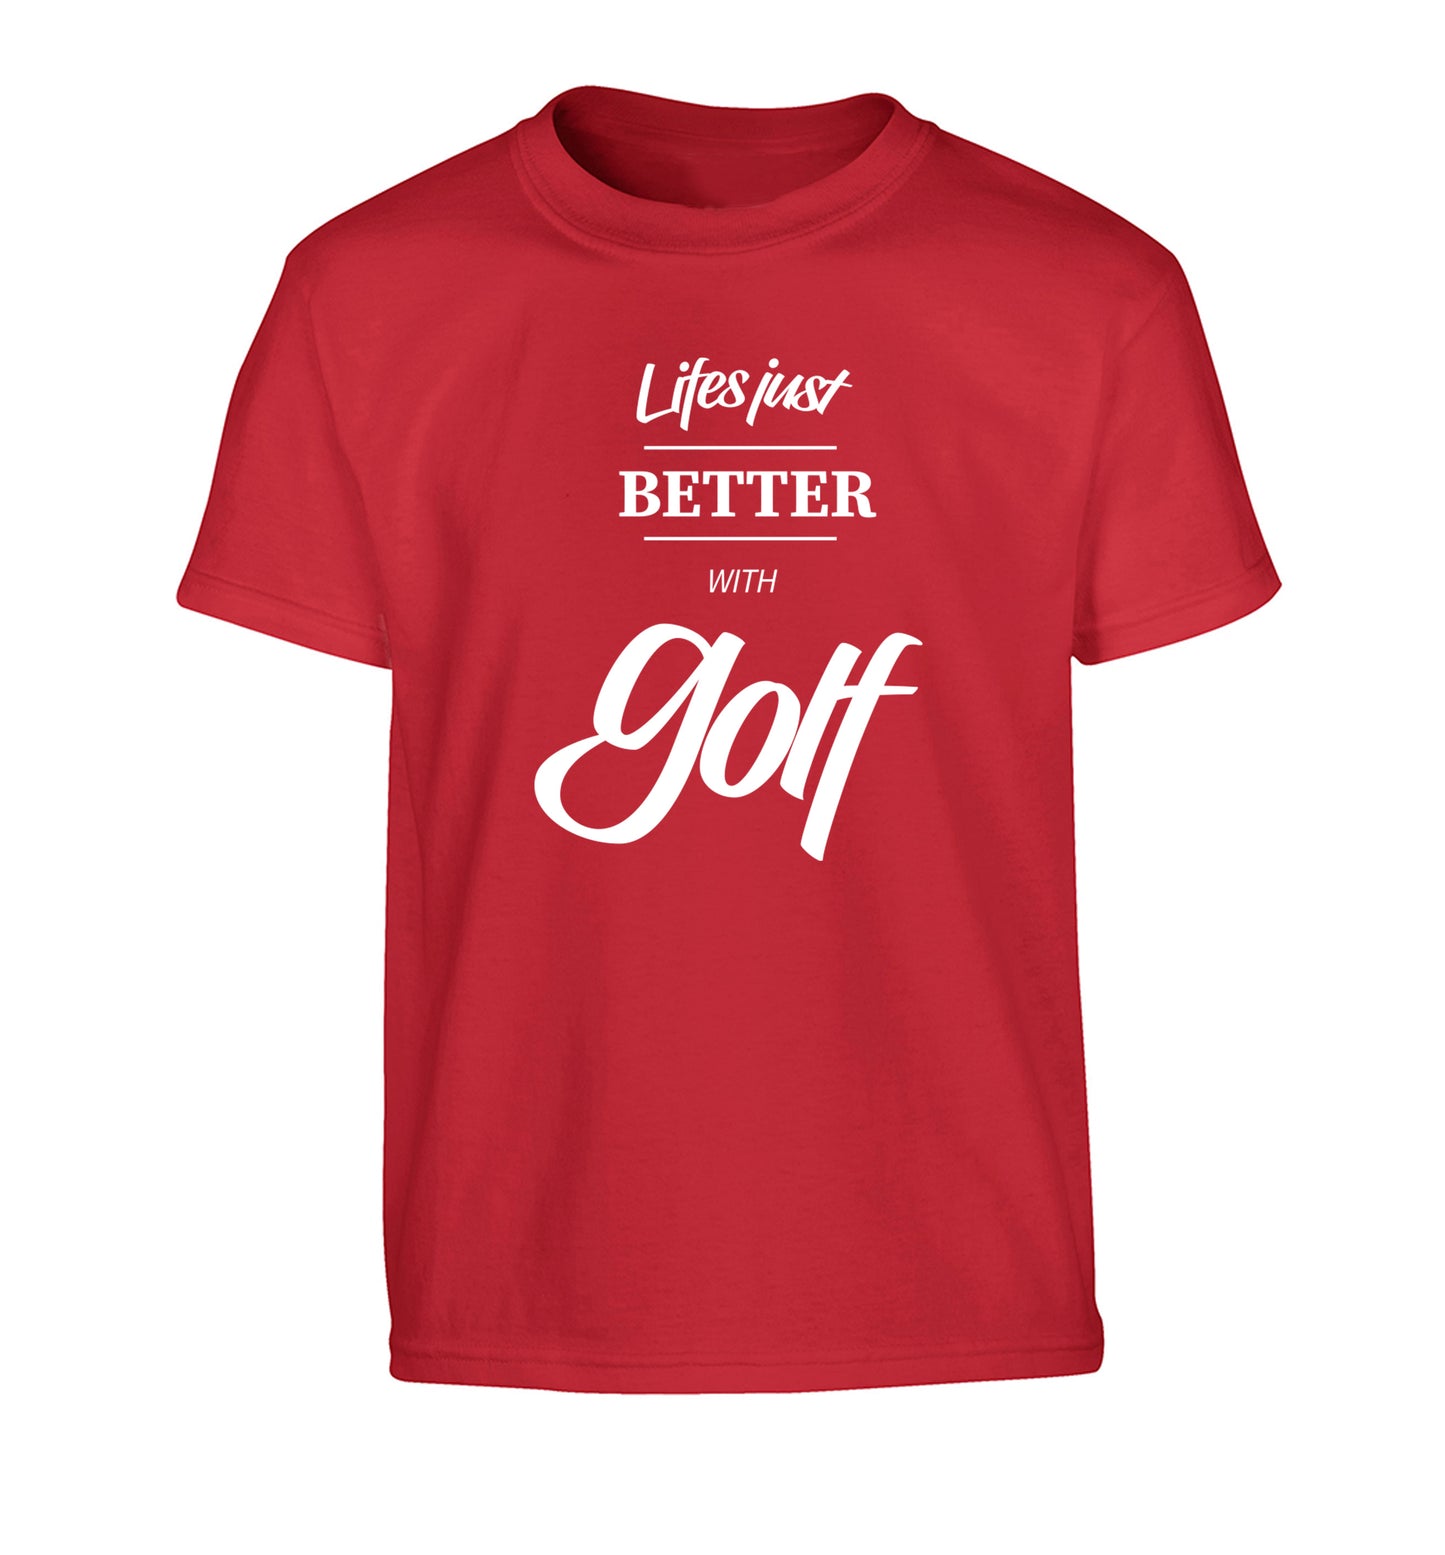 Life is better with golf Children's red Tshirt 12-13 Years